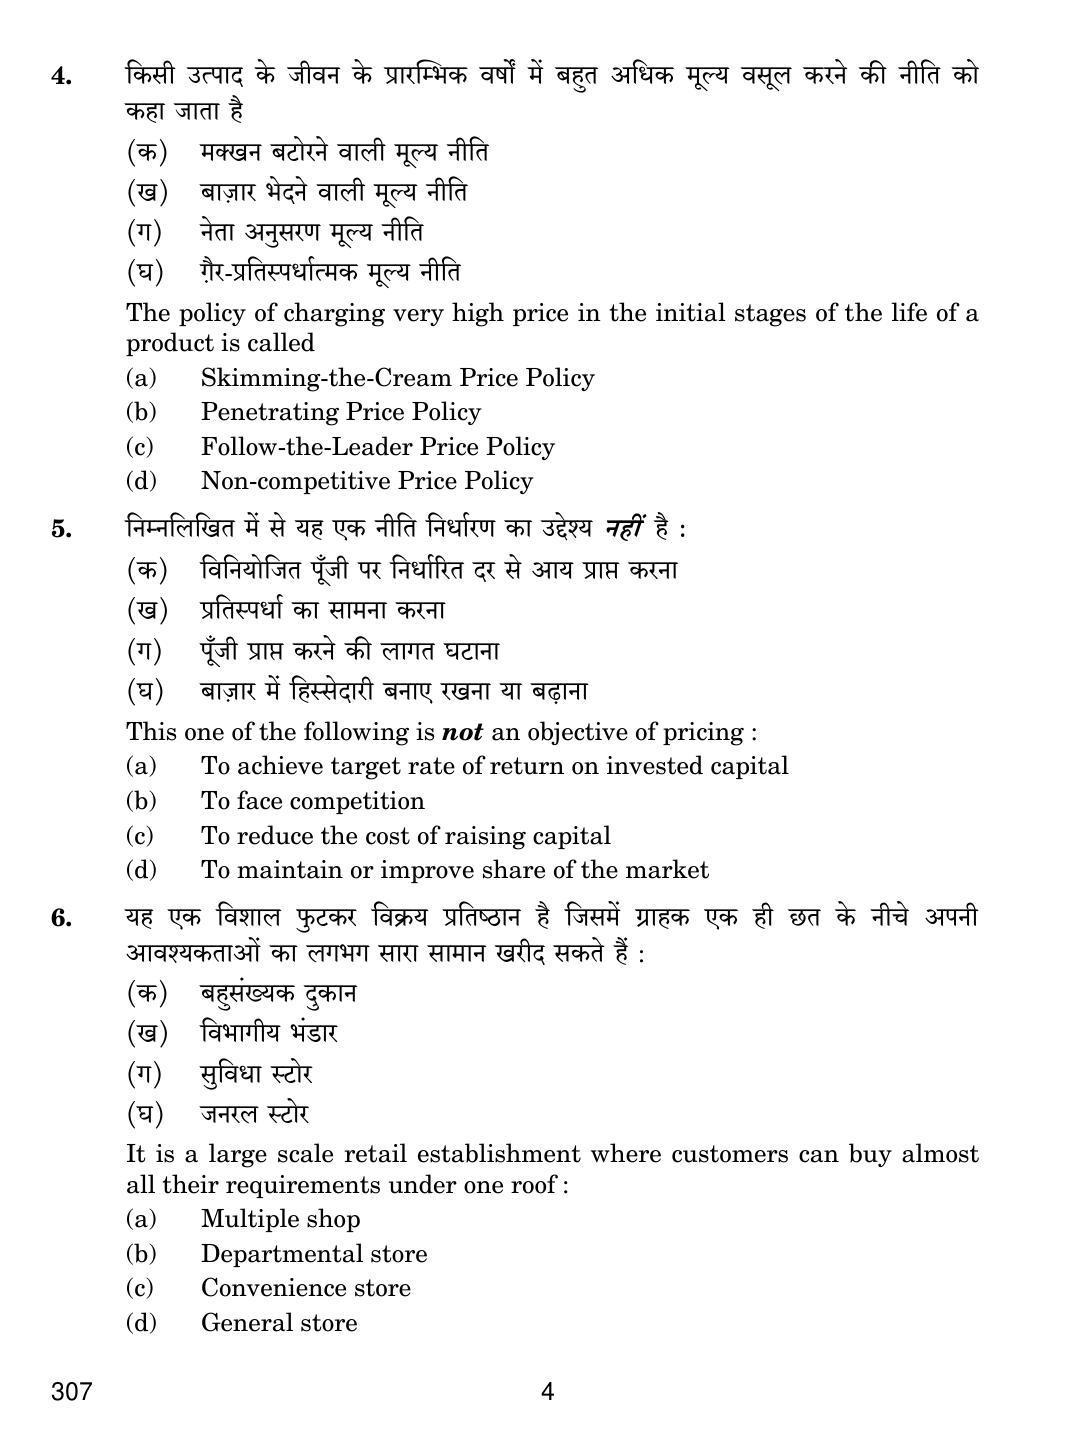 CBSE Class 12 307 Marketing 2019 Question Paper - Page 4